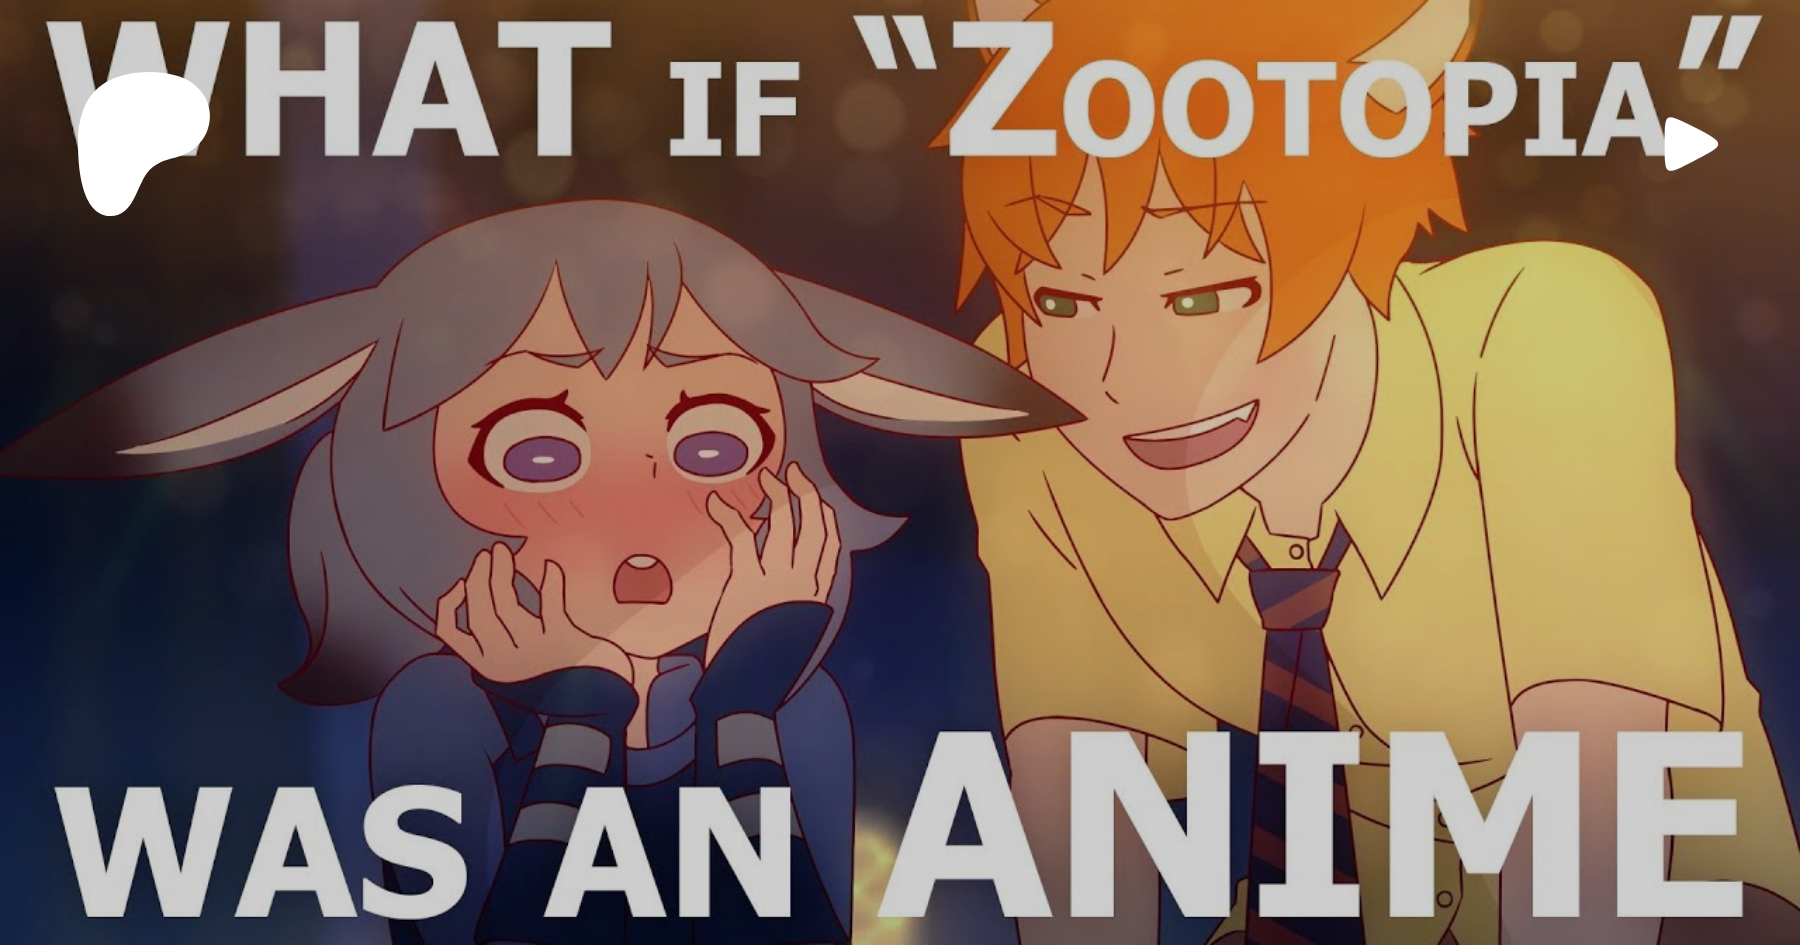 If zootopia was an anime uncensored